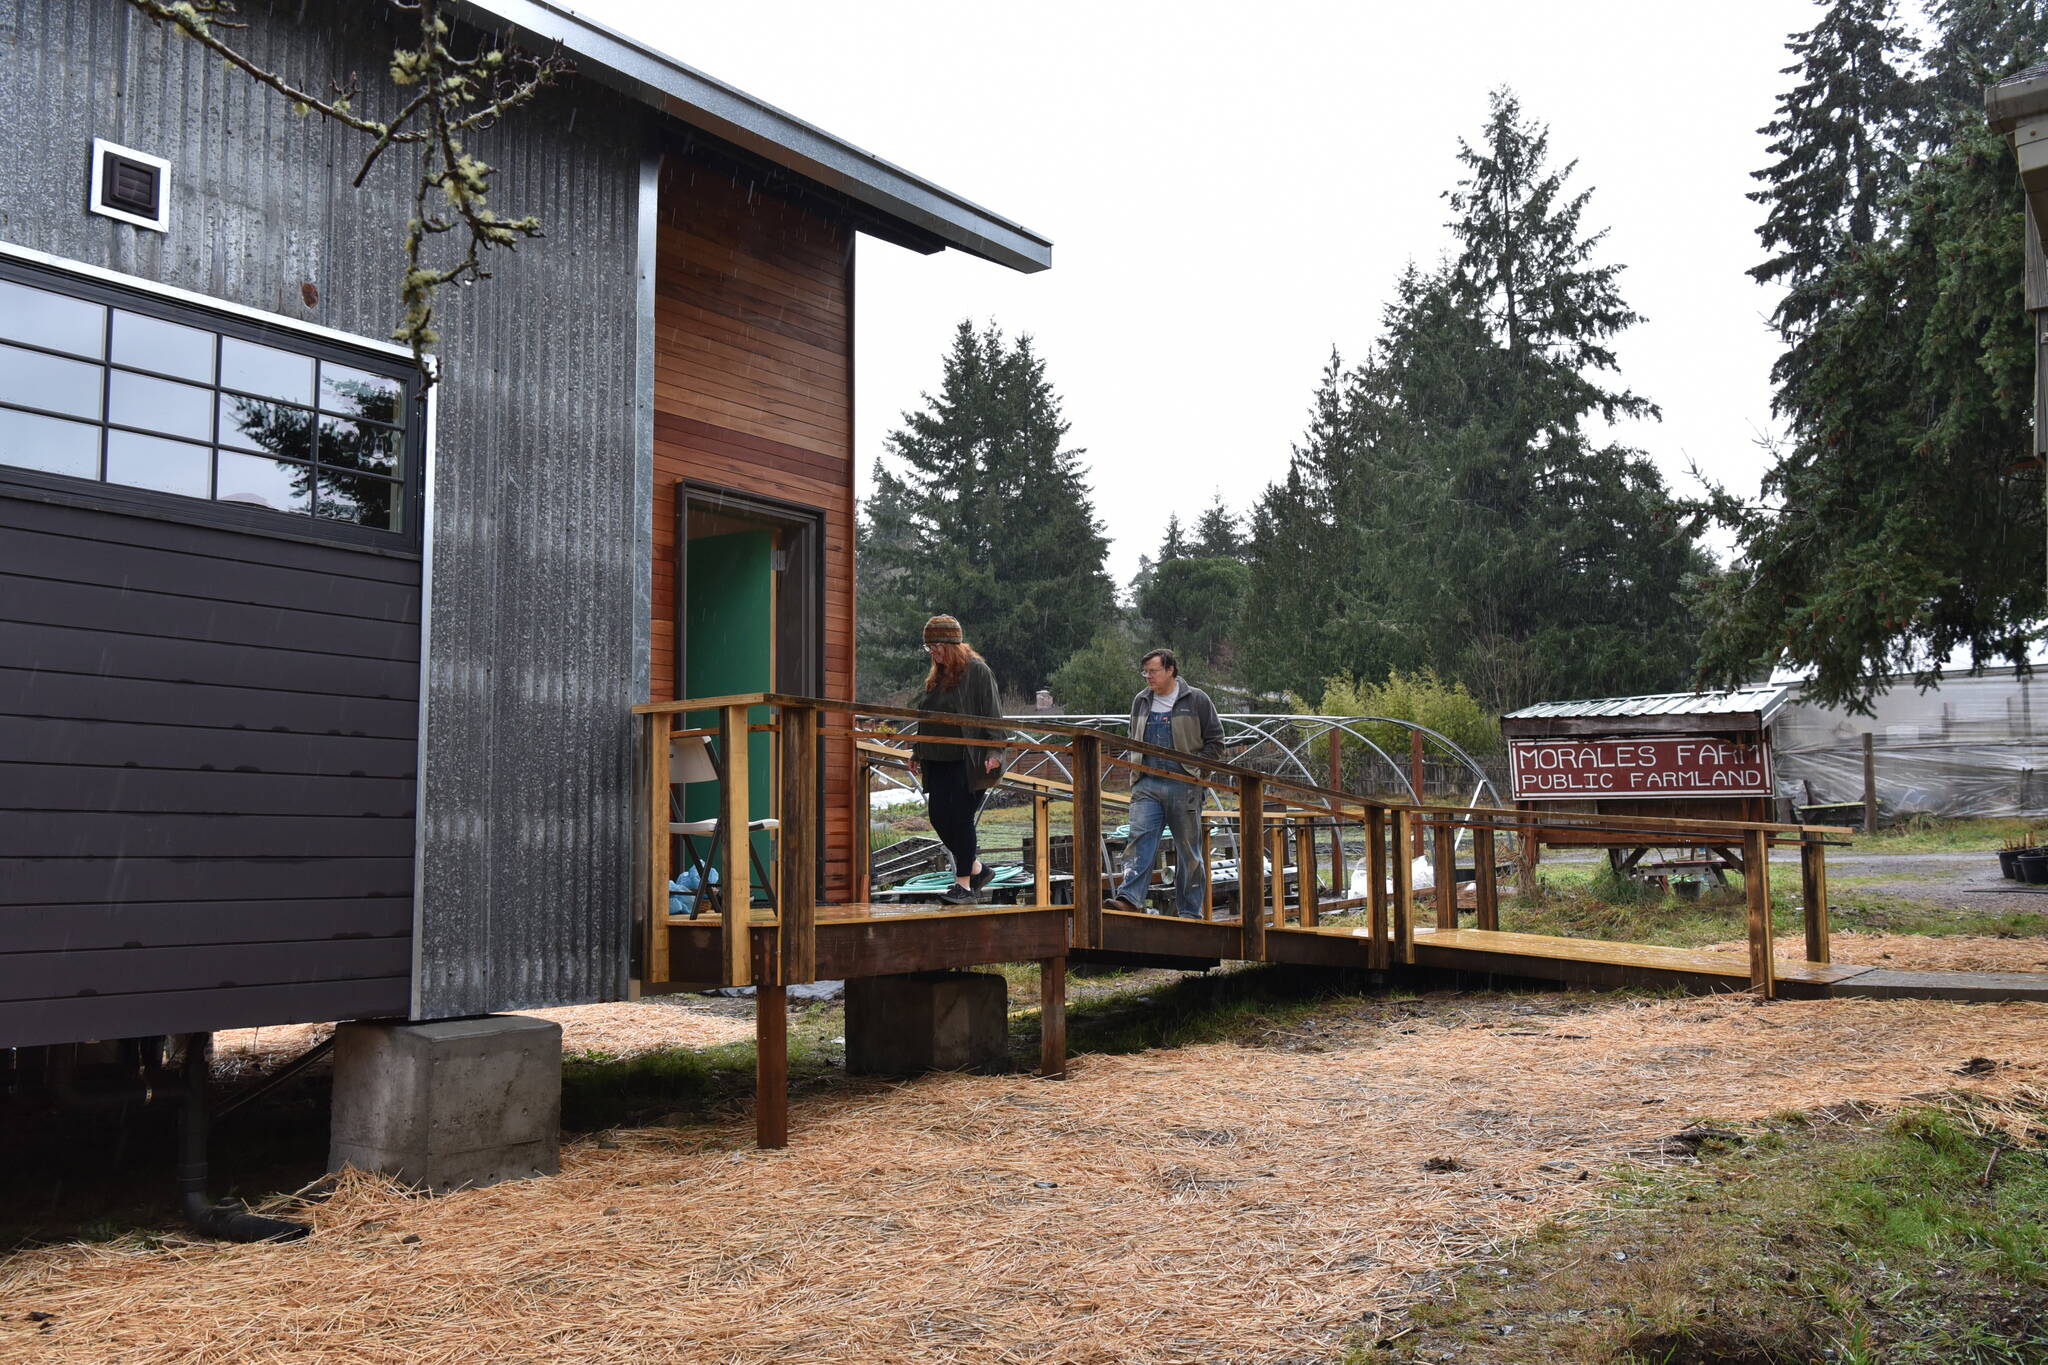 A ramp makes the the third tiny home ADA accessible.